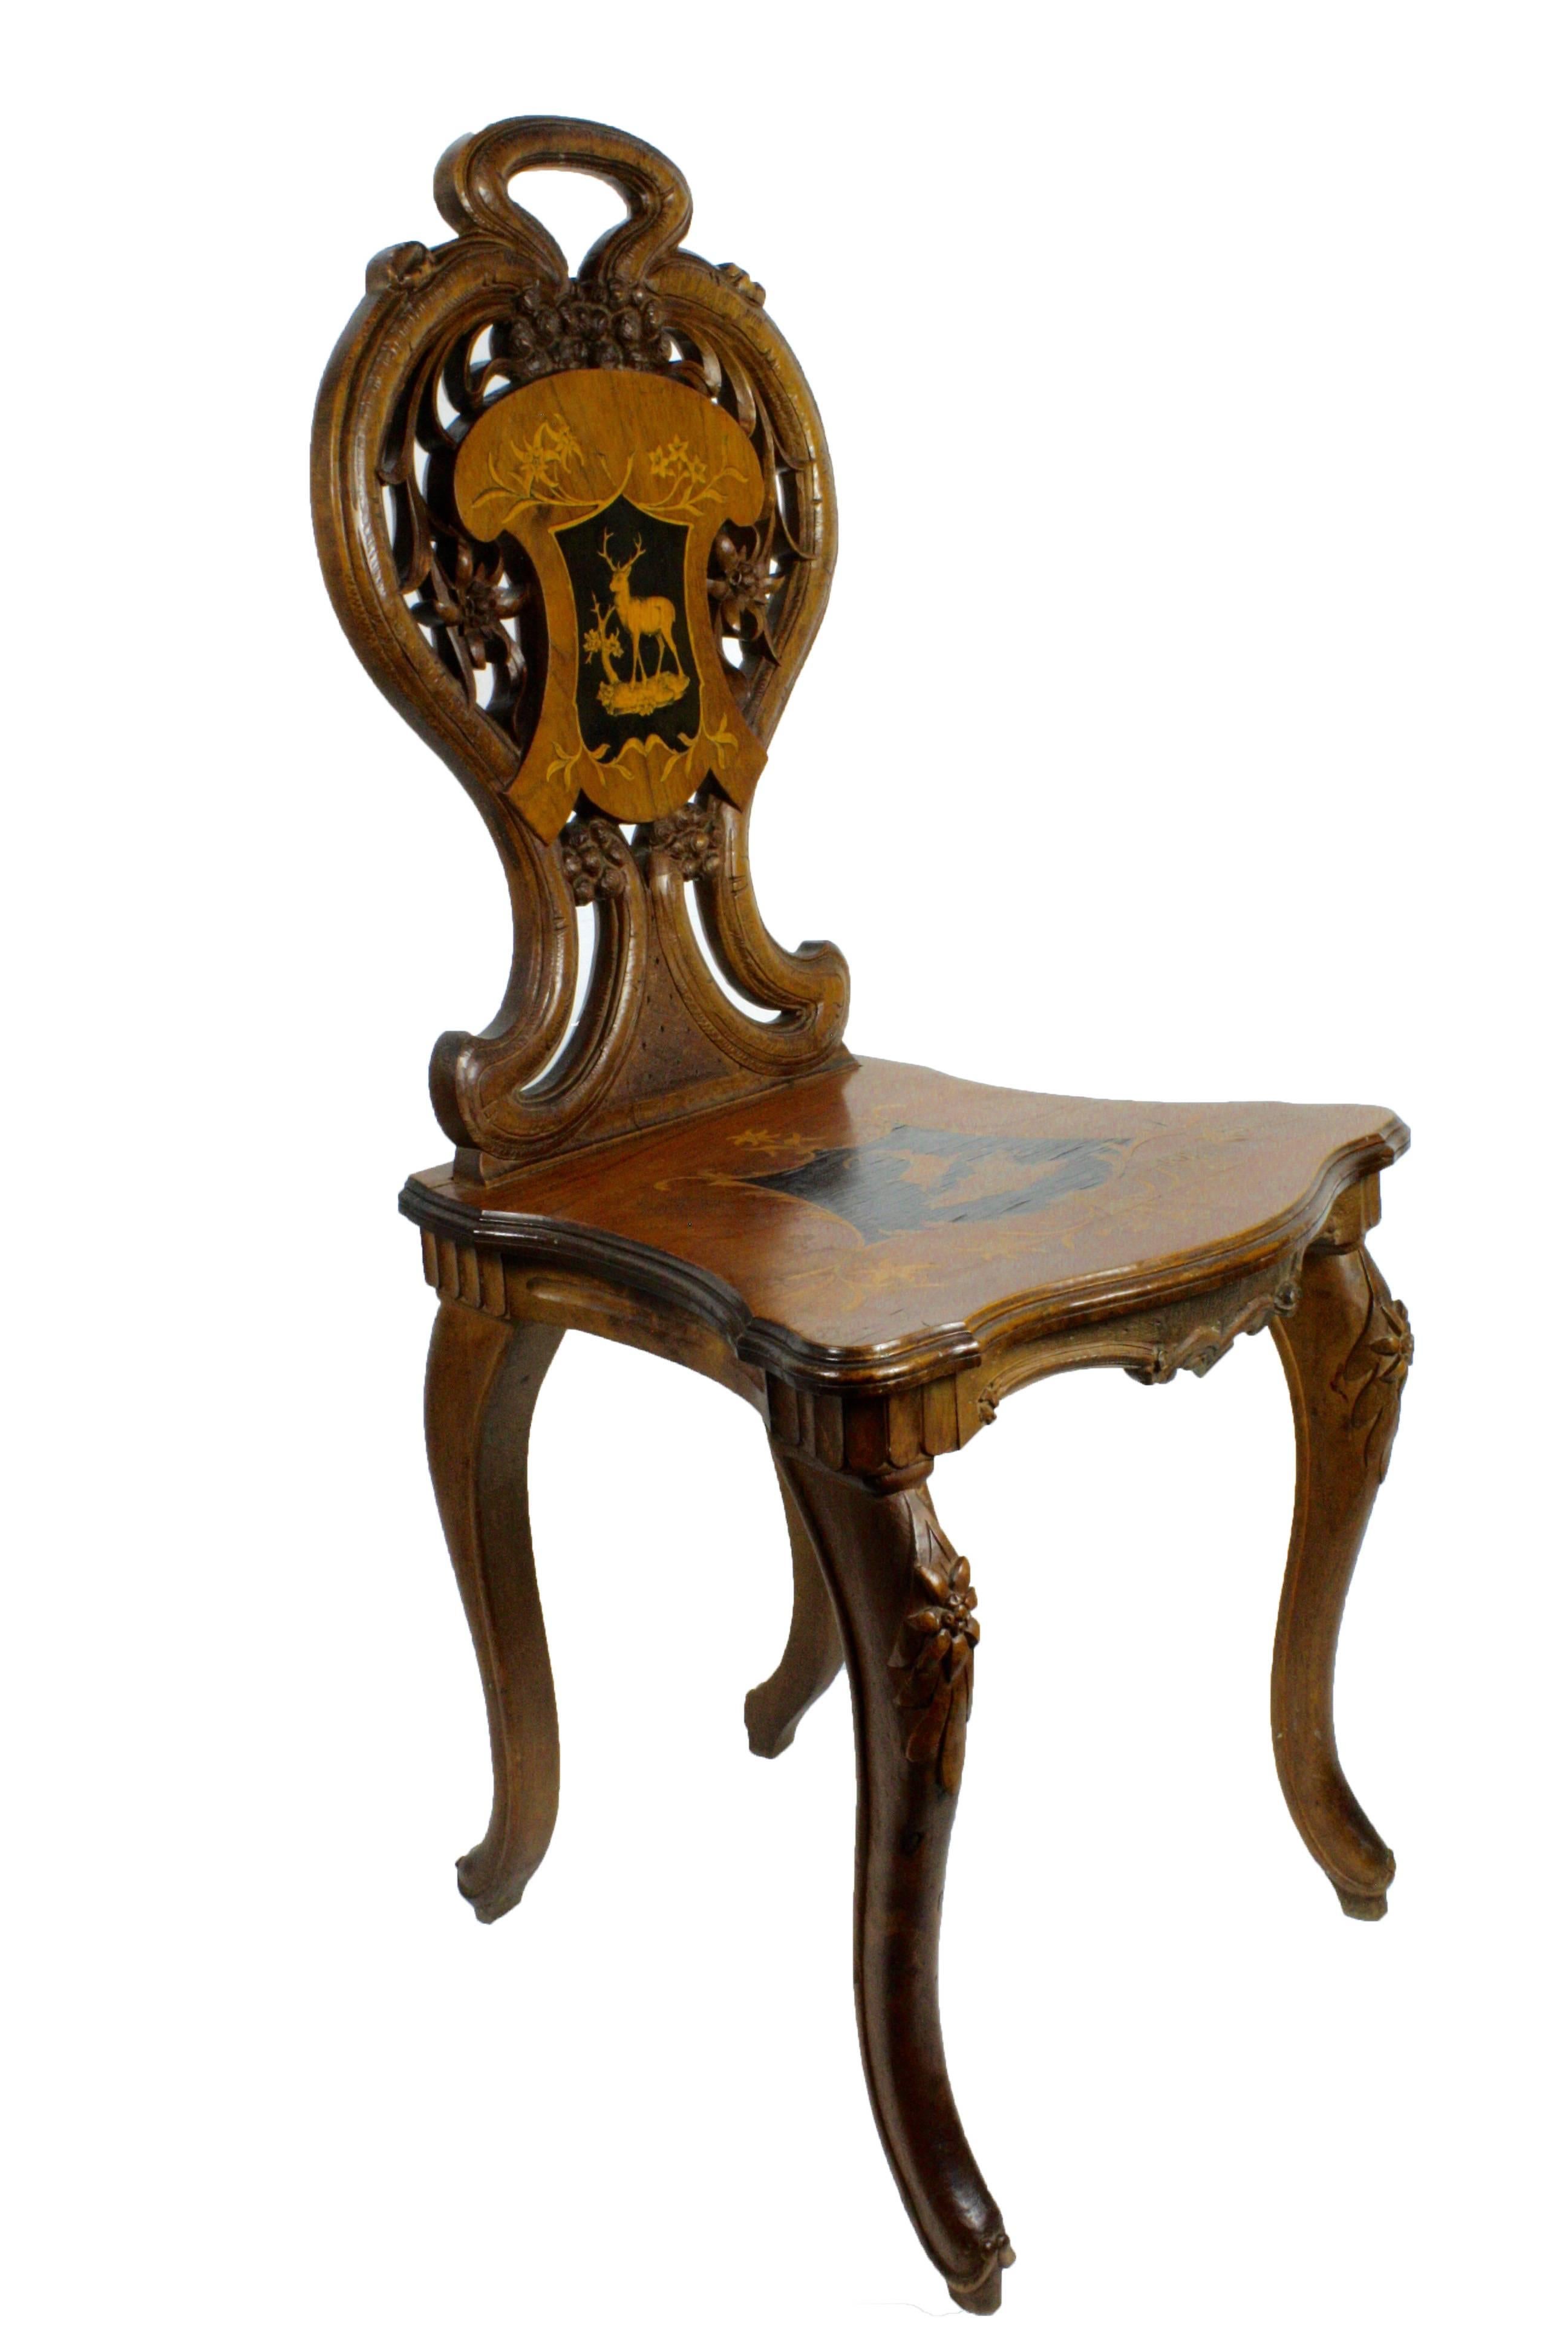 A carved Swiss walnut chair featuring inlaid ibex and stag with delicate edelweiss and floral carvings.